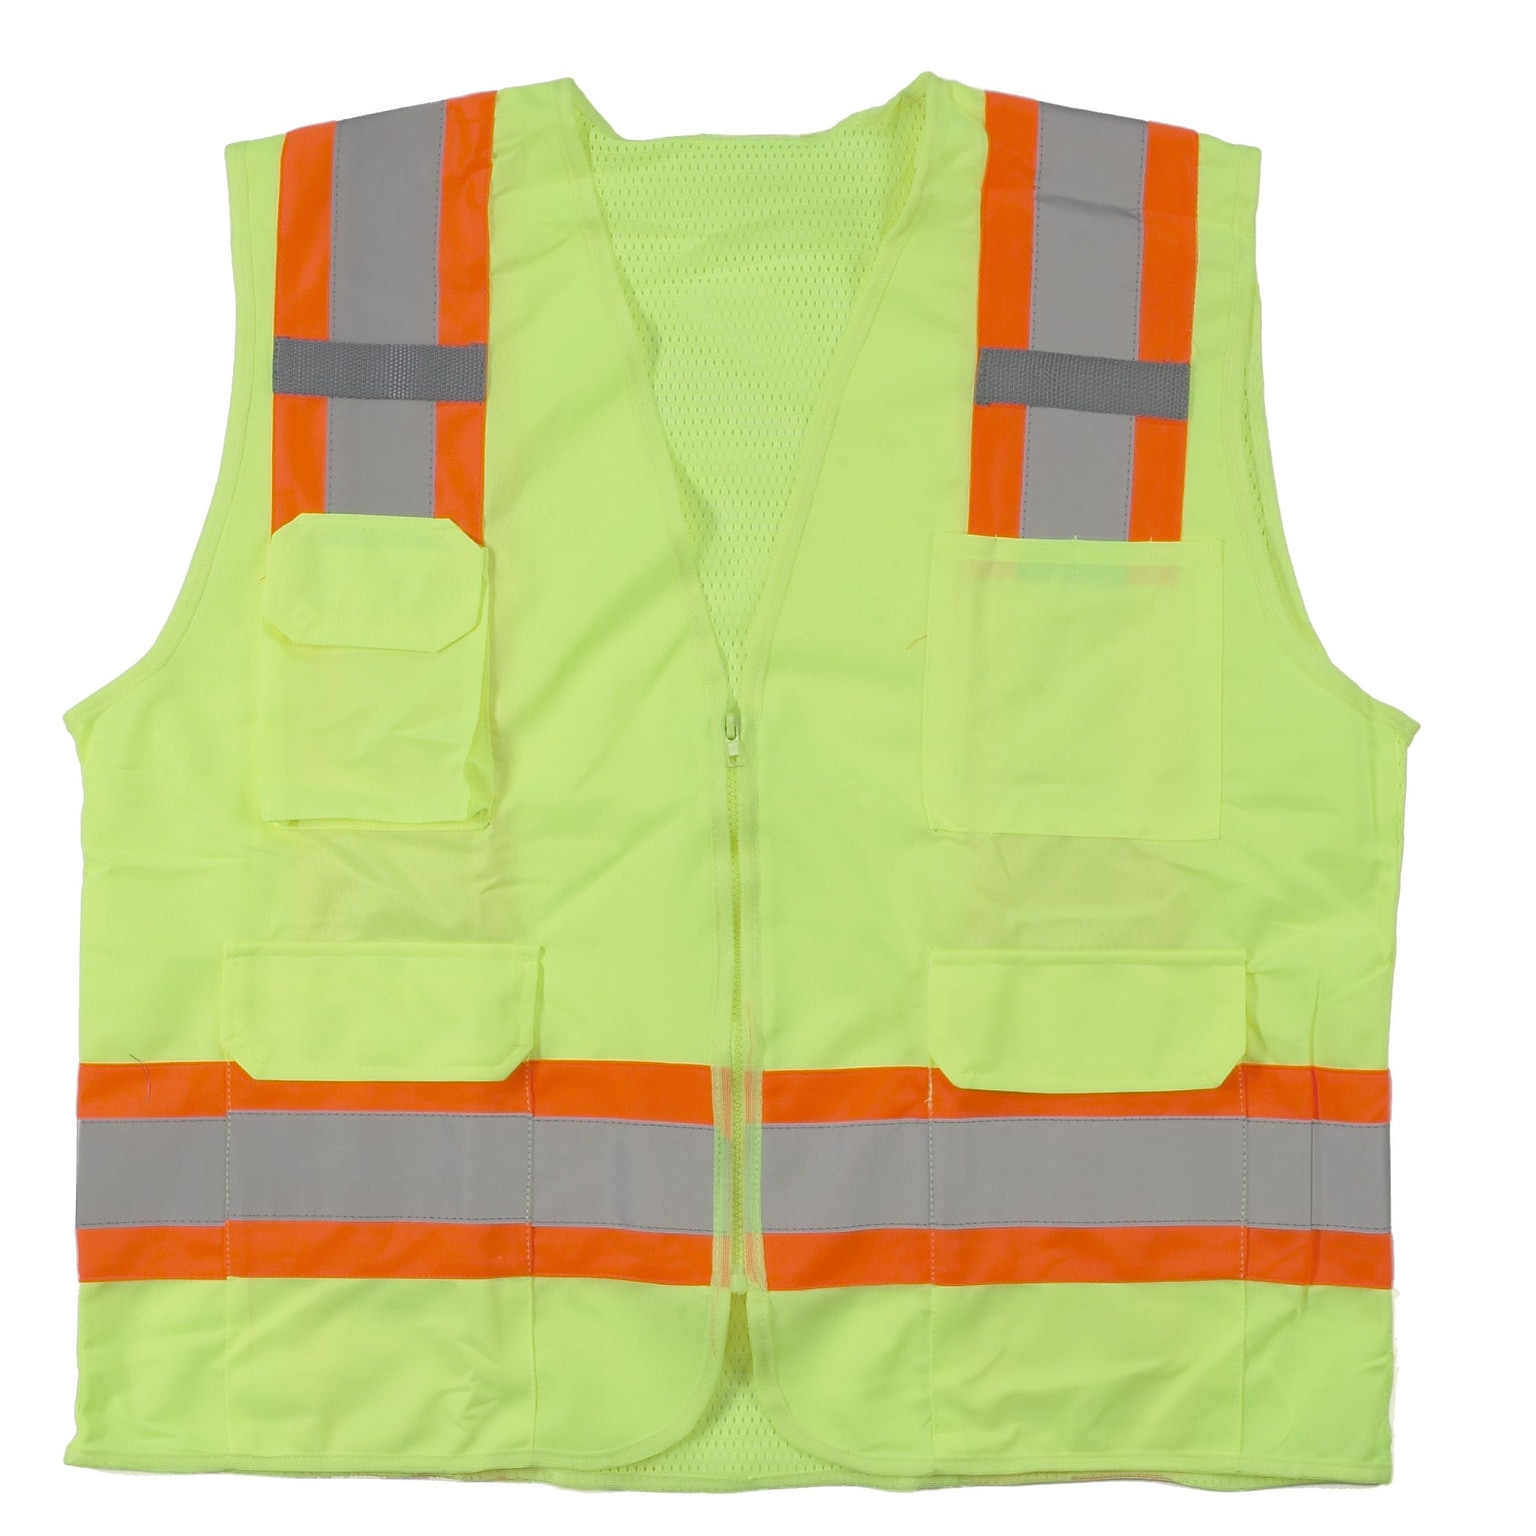 Mutual Industries MiViz High Visibility Sleeveless Safety Vest, ANSI Class R2, Lime, X-Large (16369-0-4)